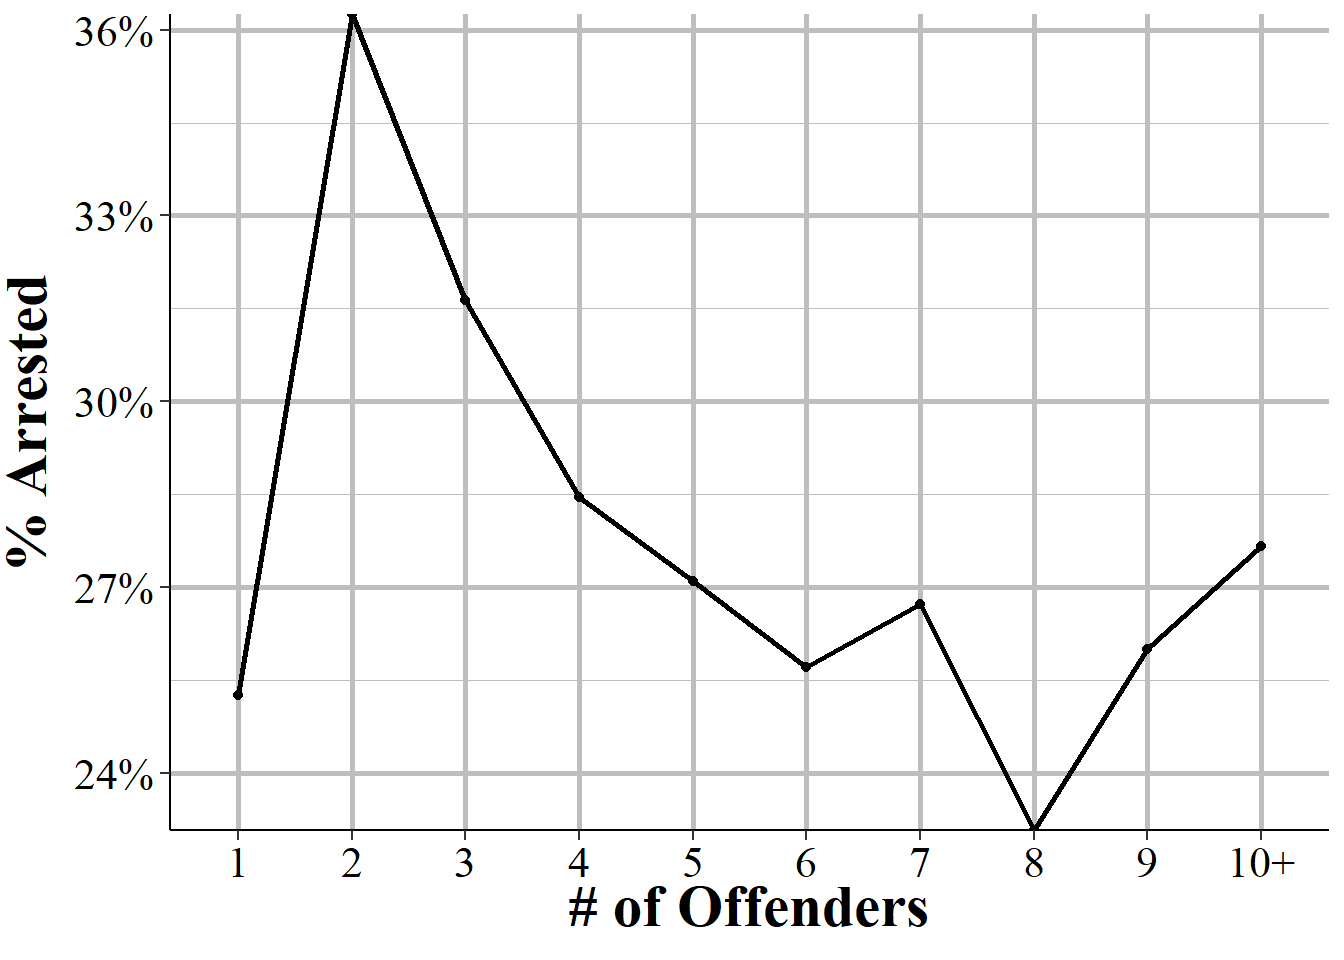 The percent of people arrested by the number of offenders in an incident.